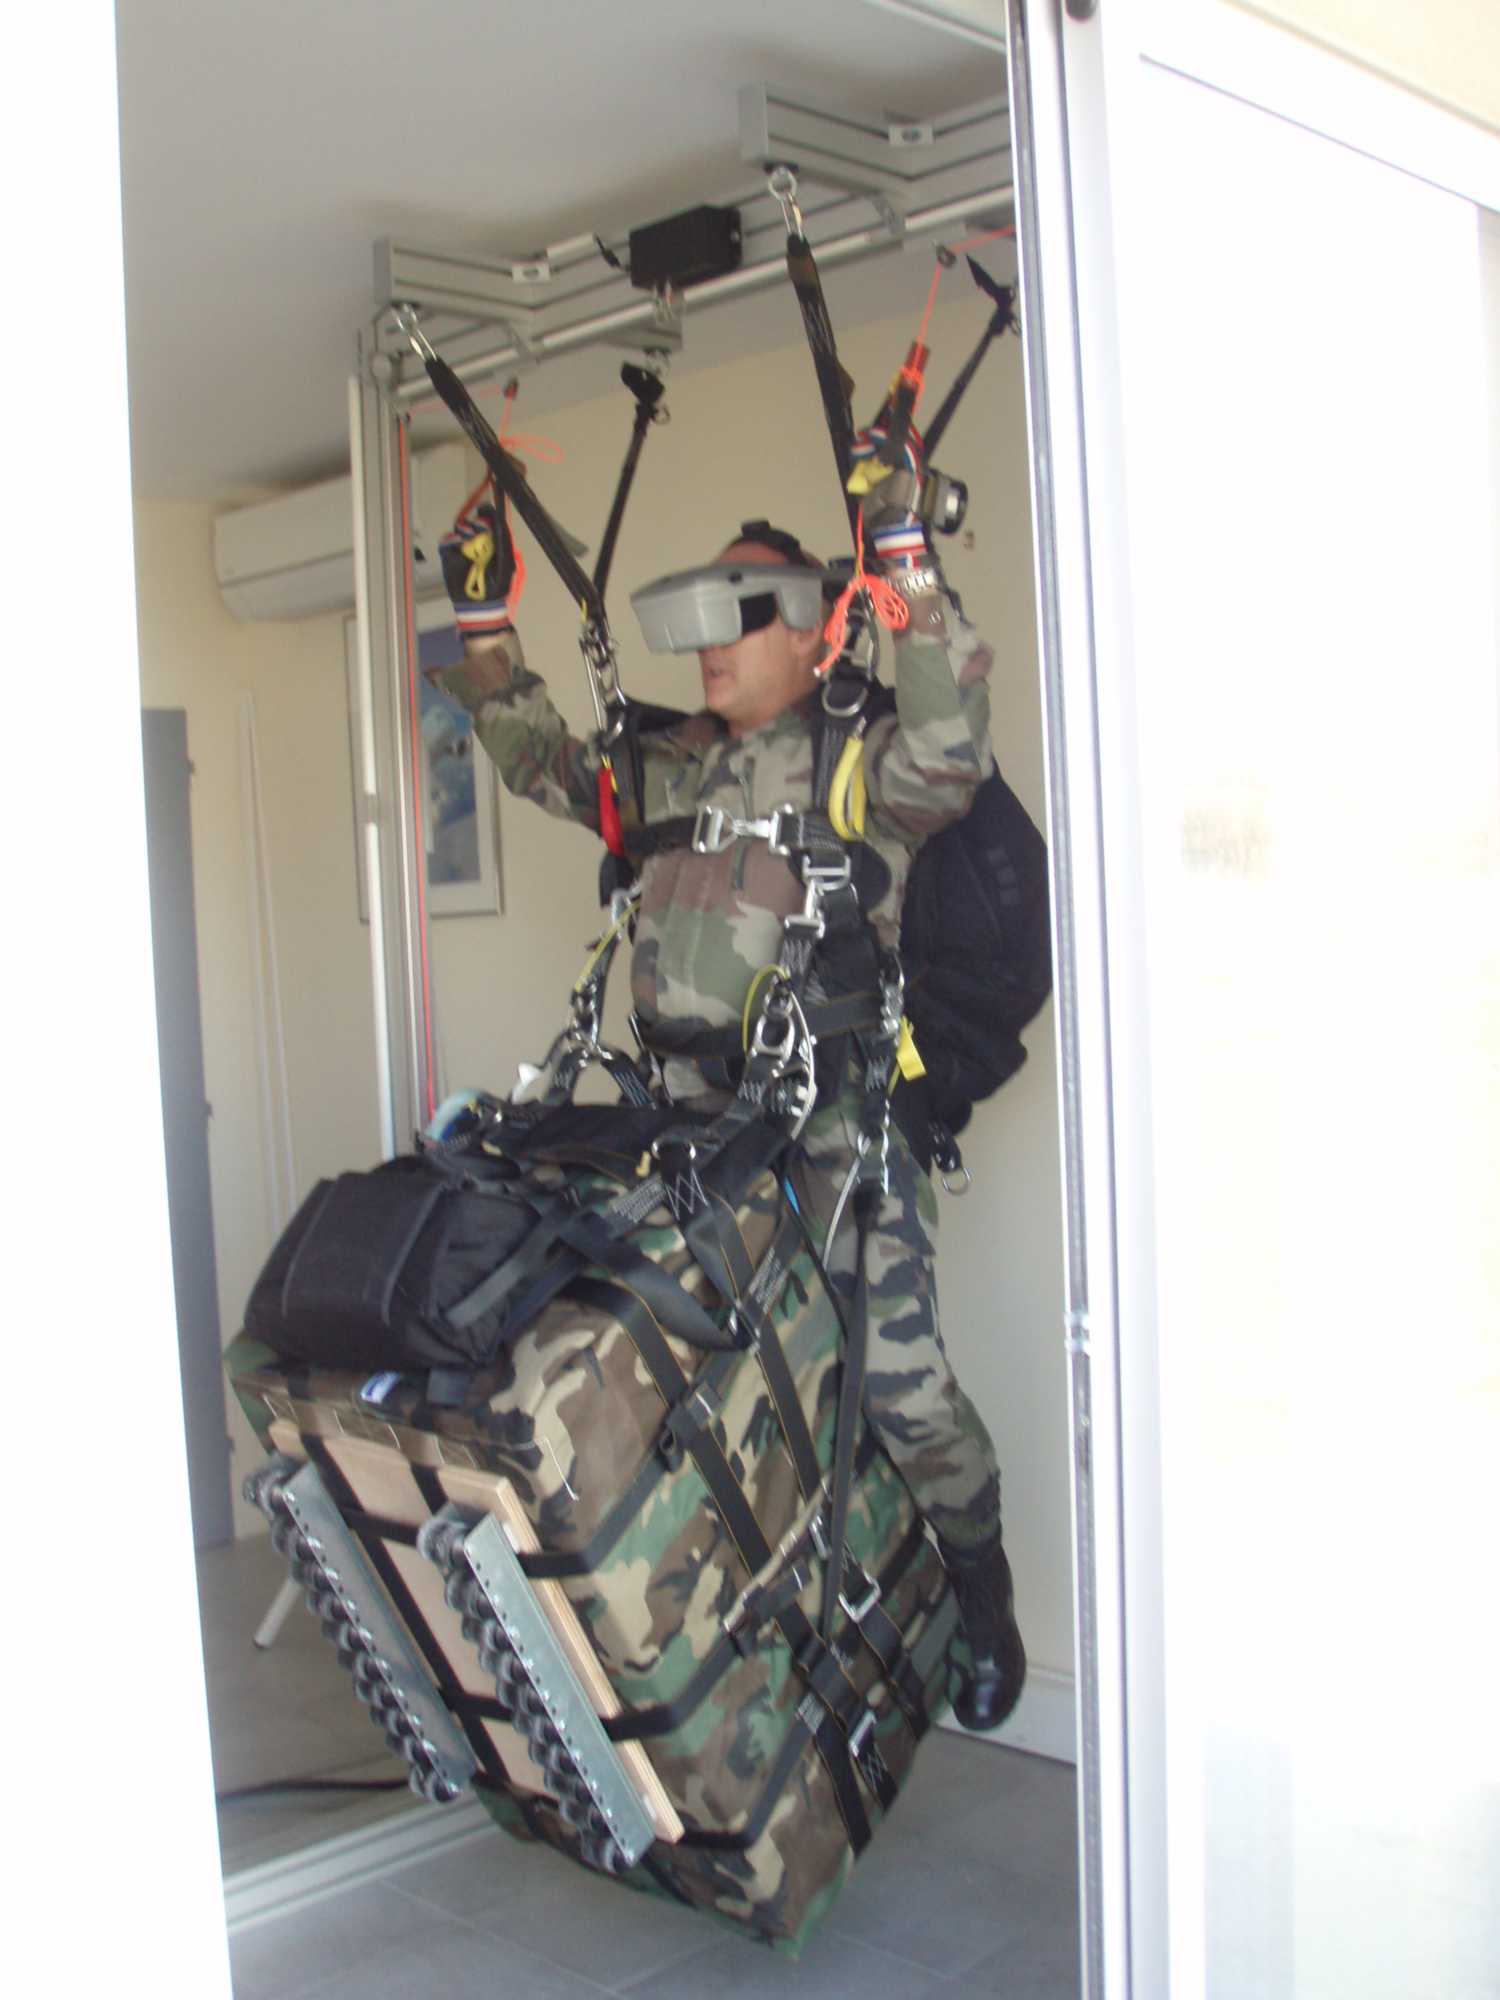 PASS testing by a french paratroopers